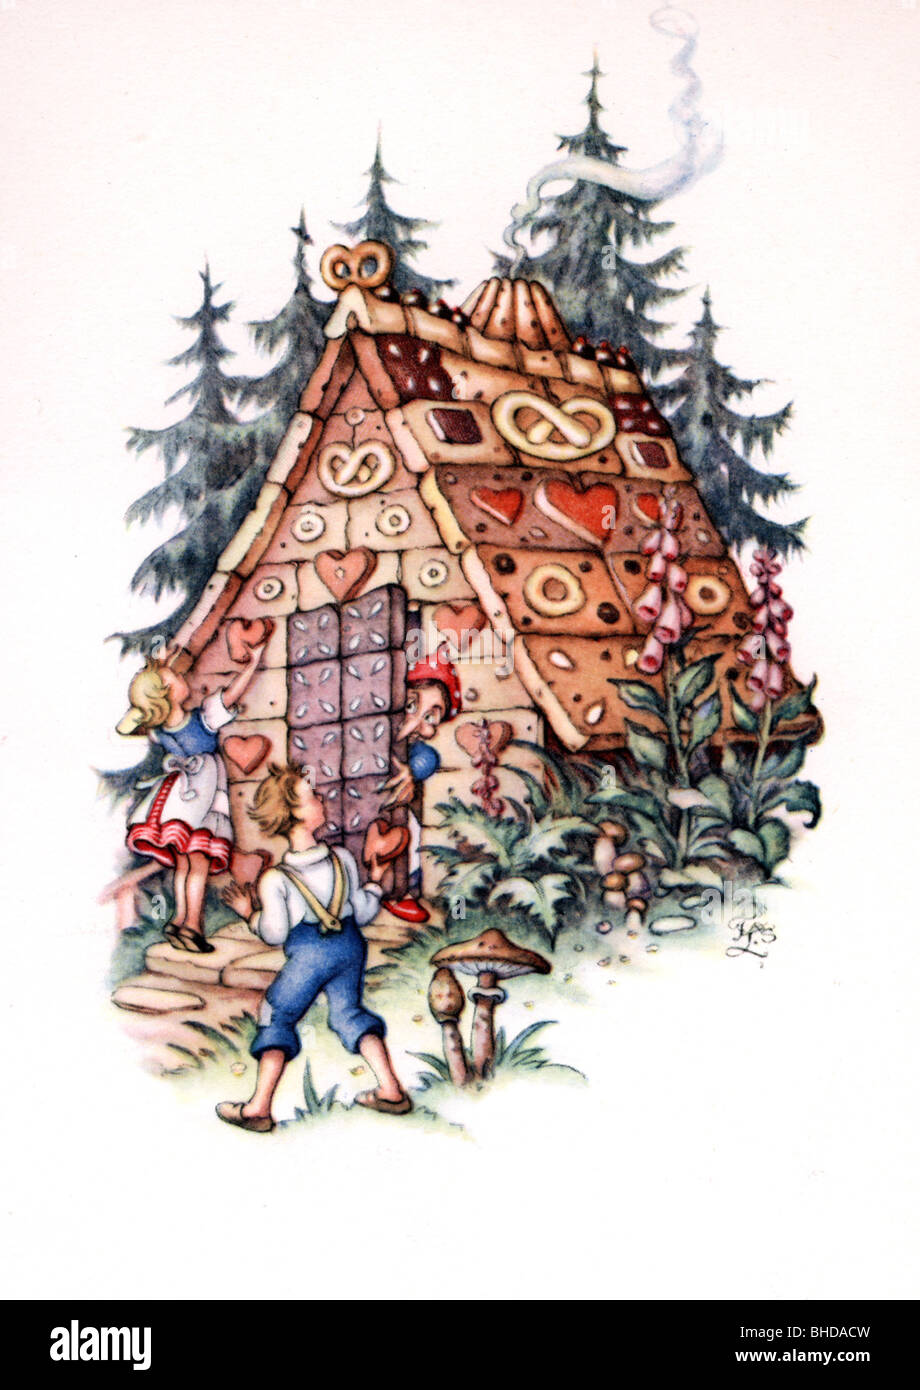 literature, fairy tales, Hansel and Gretel, Brothers Grimm, colour drawing, tale, gingerbread house, cottage, witch, mushrooms, children, kids, siblings, historic, historical, people, Stock Photo